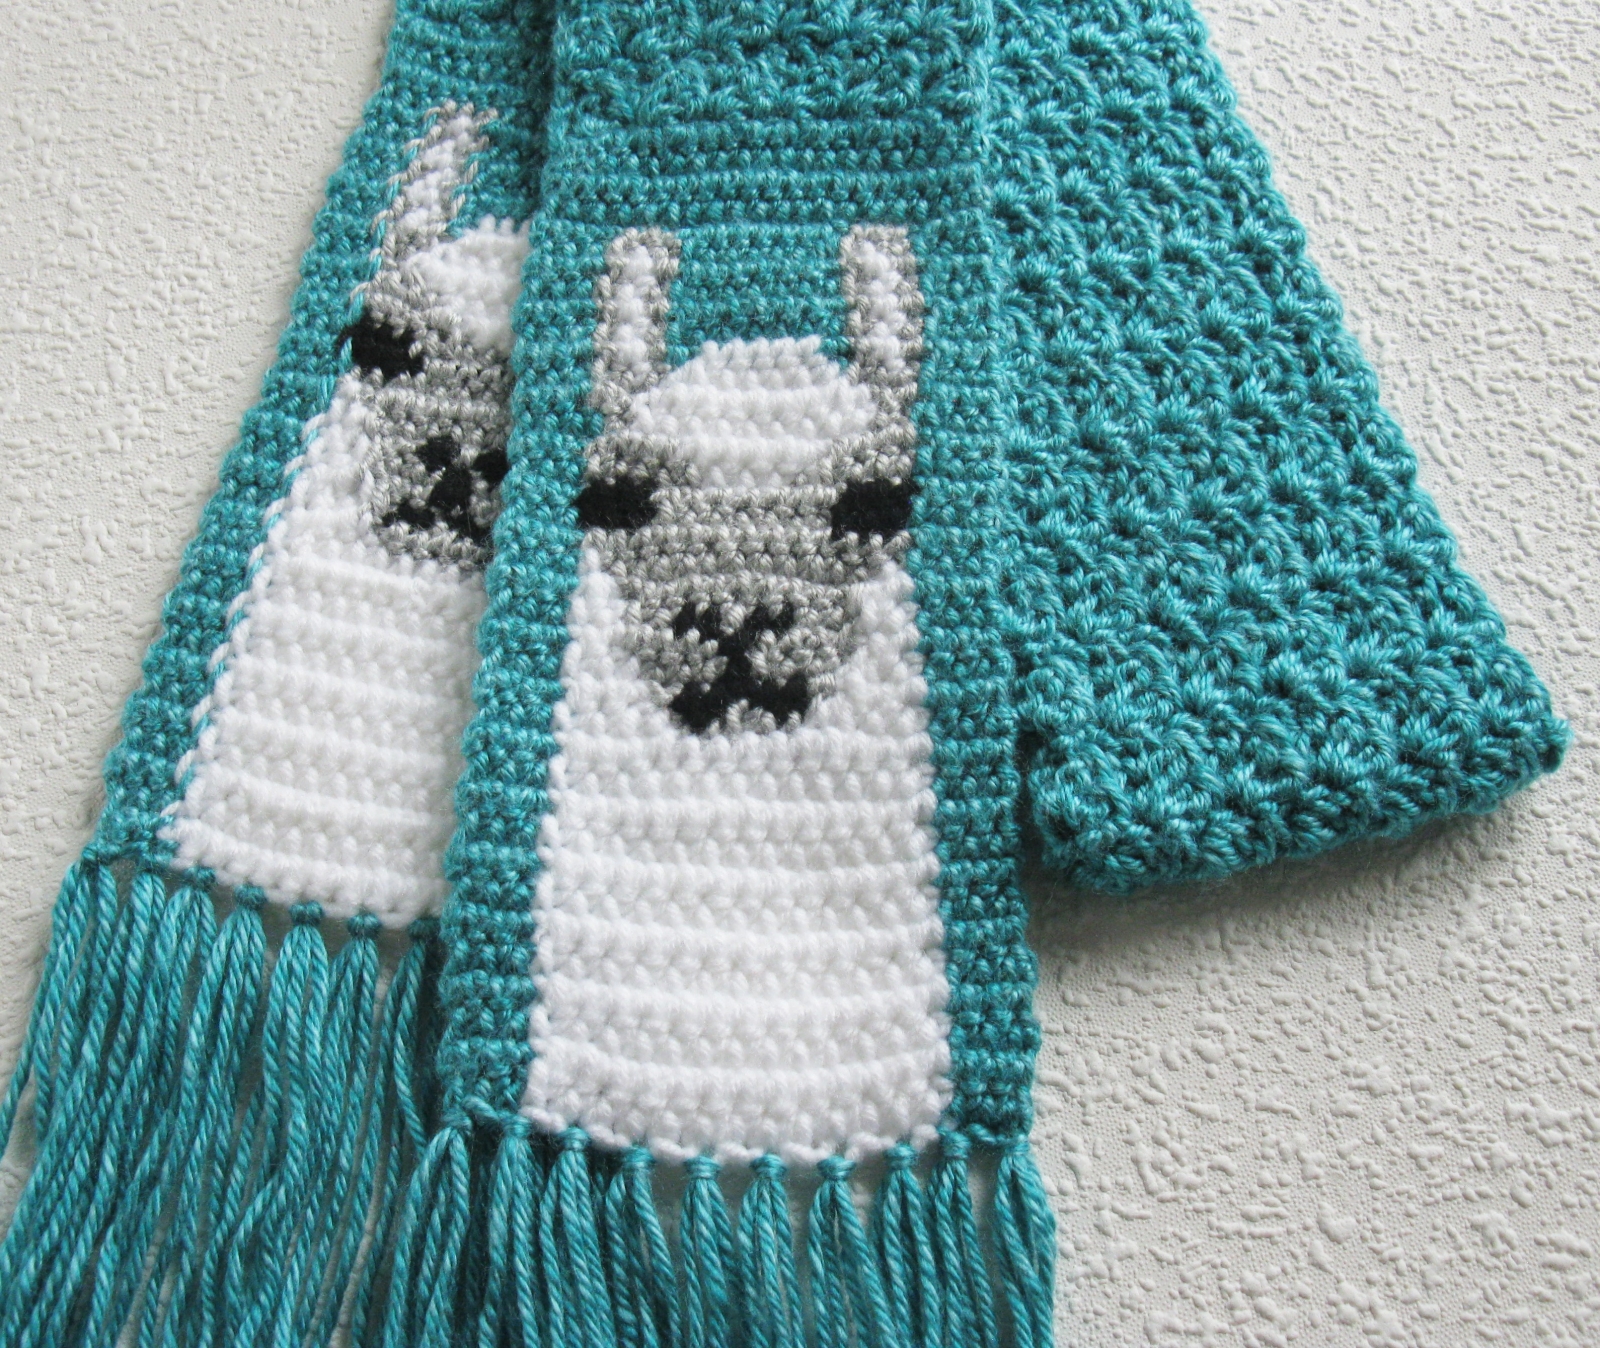 Turquoise blue scarf with crochet white Llamas or Alpacas | hooknsaw